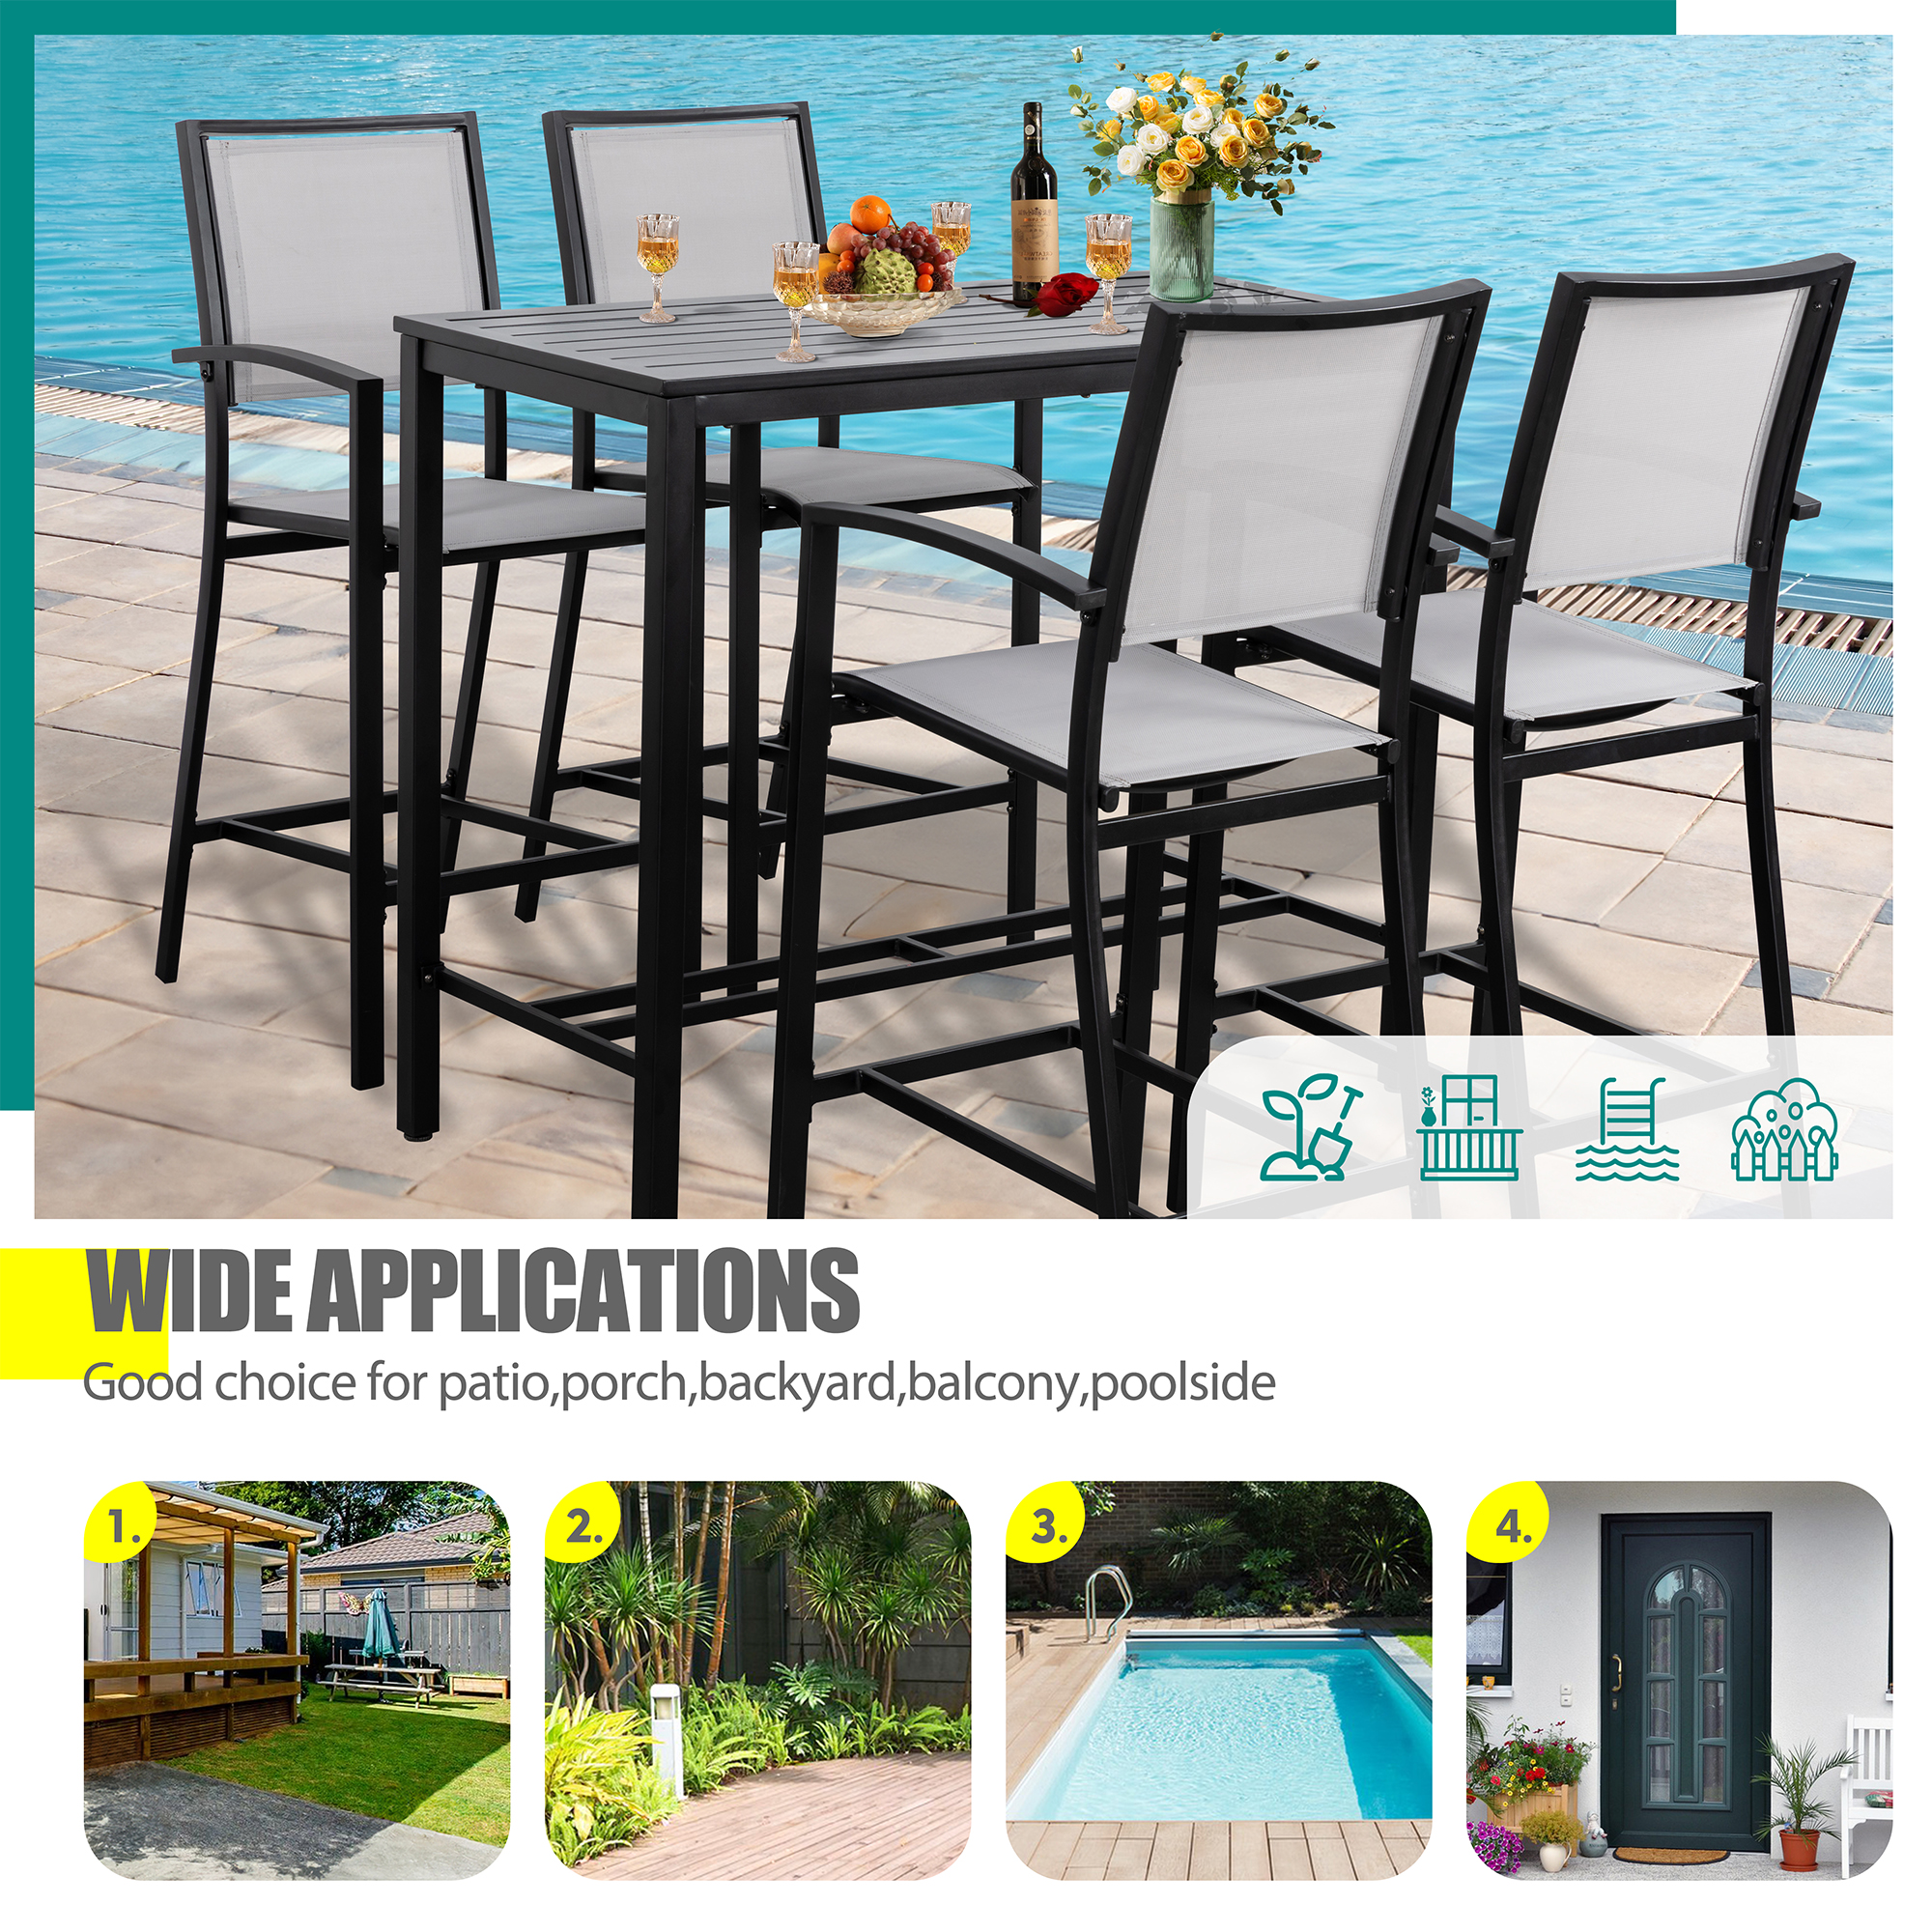 Walsunny 5 Piece Patio High Bar Set, Outdoor Bistro Set All Weather Metal Textilene Patio Dining Set Stools Chair of 4 and Bar Table Gray - image 4 of 7